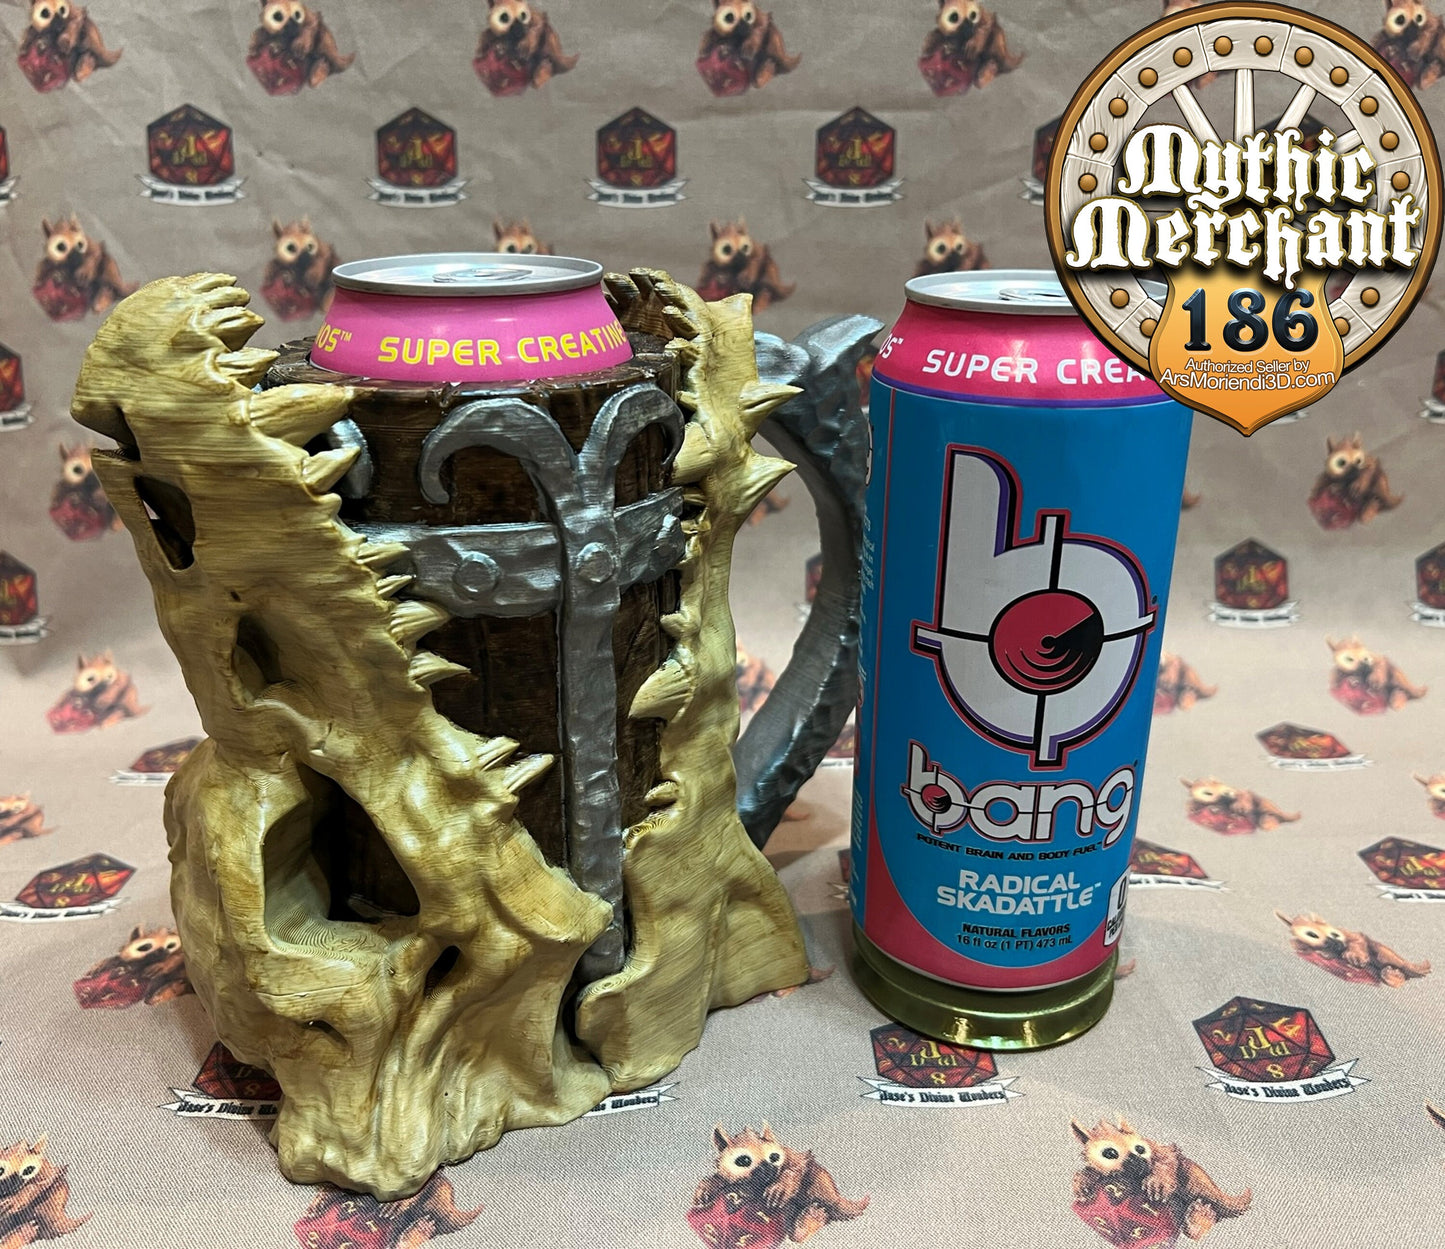 Dragon Skull Can Holder Mythic Mug from Ars Moriendi 3D - Dungeons and Dragons, Pathfinder, TTRPG, Dice Cup/Roller